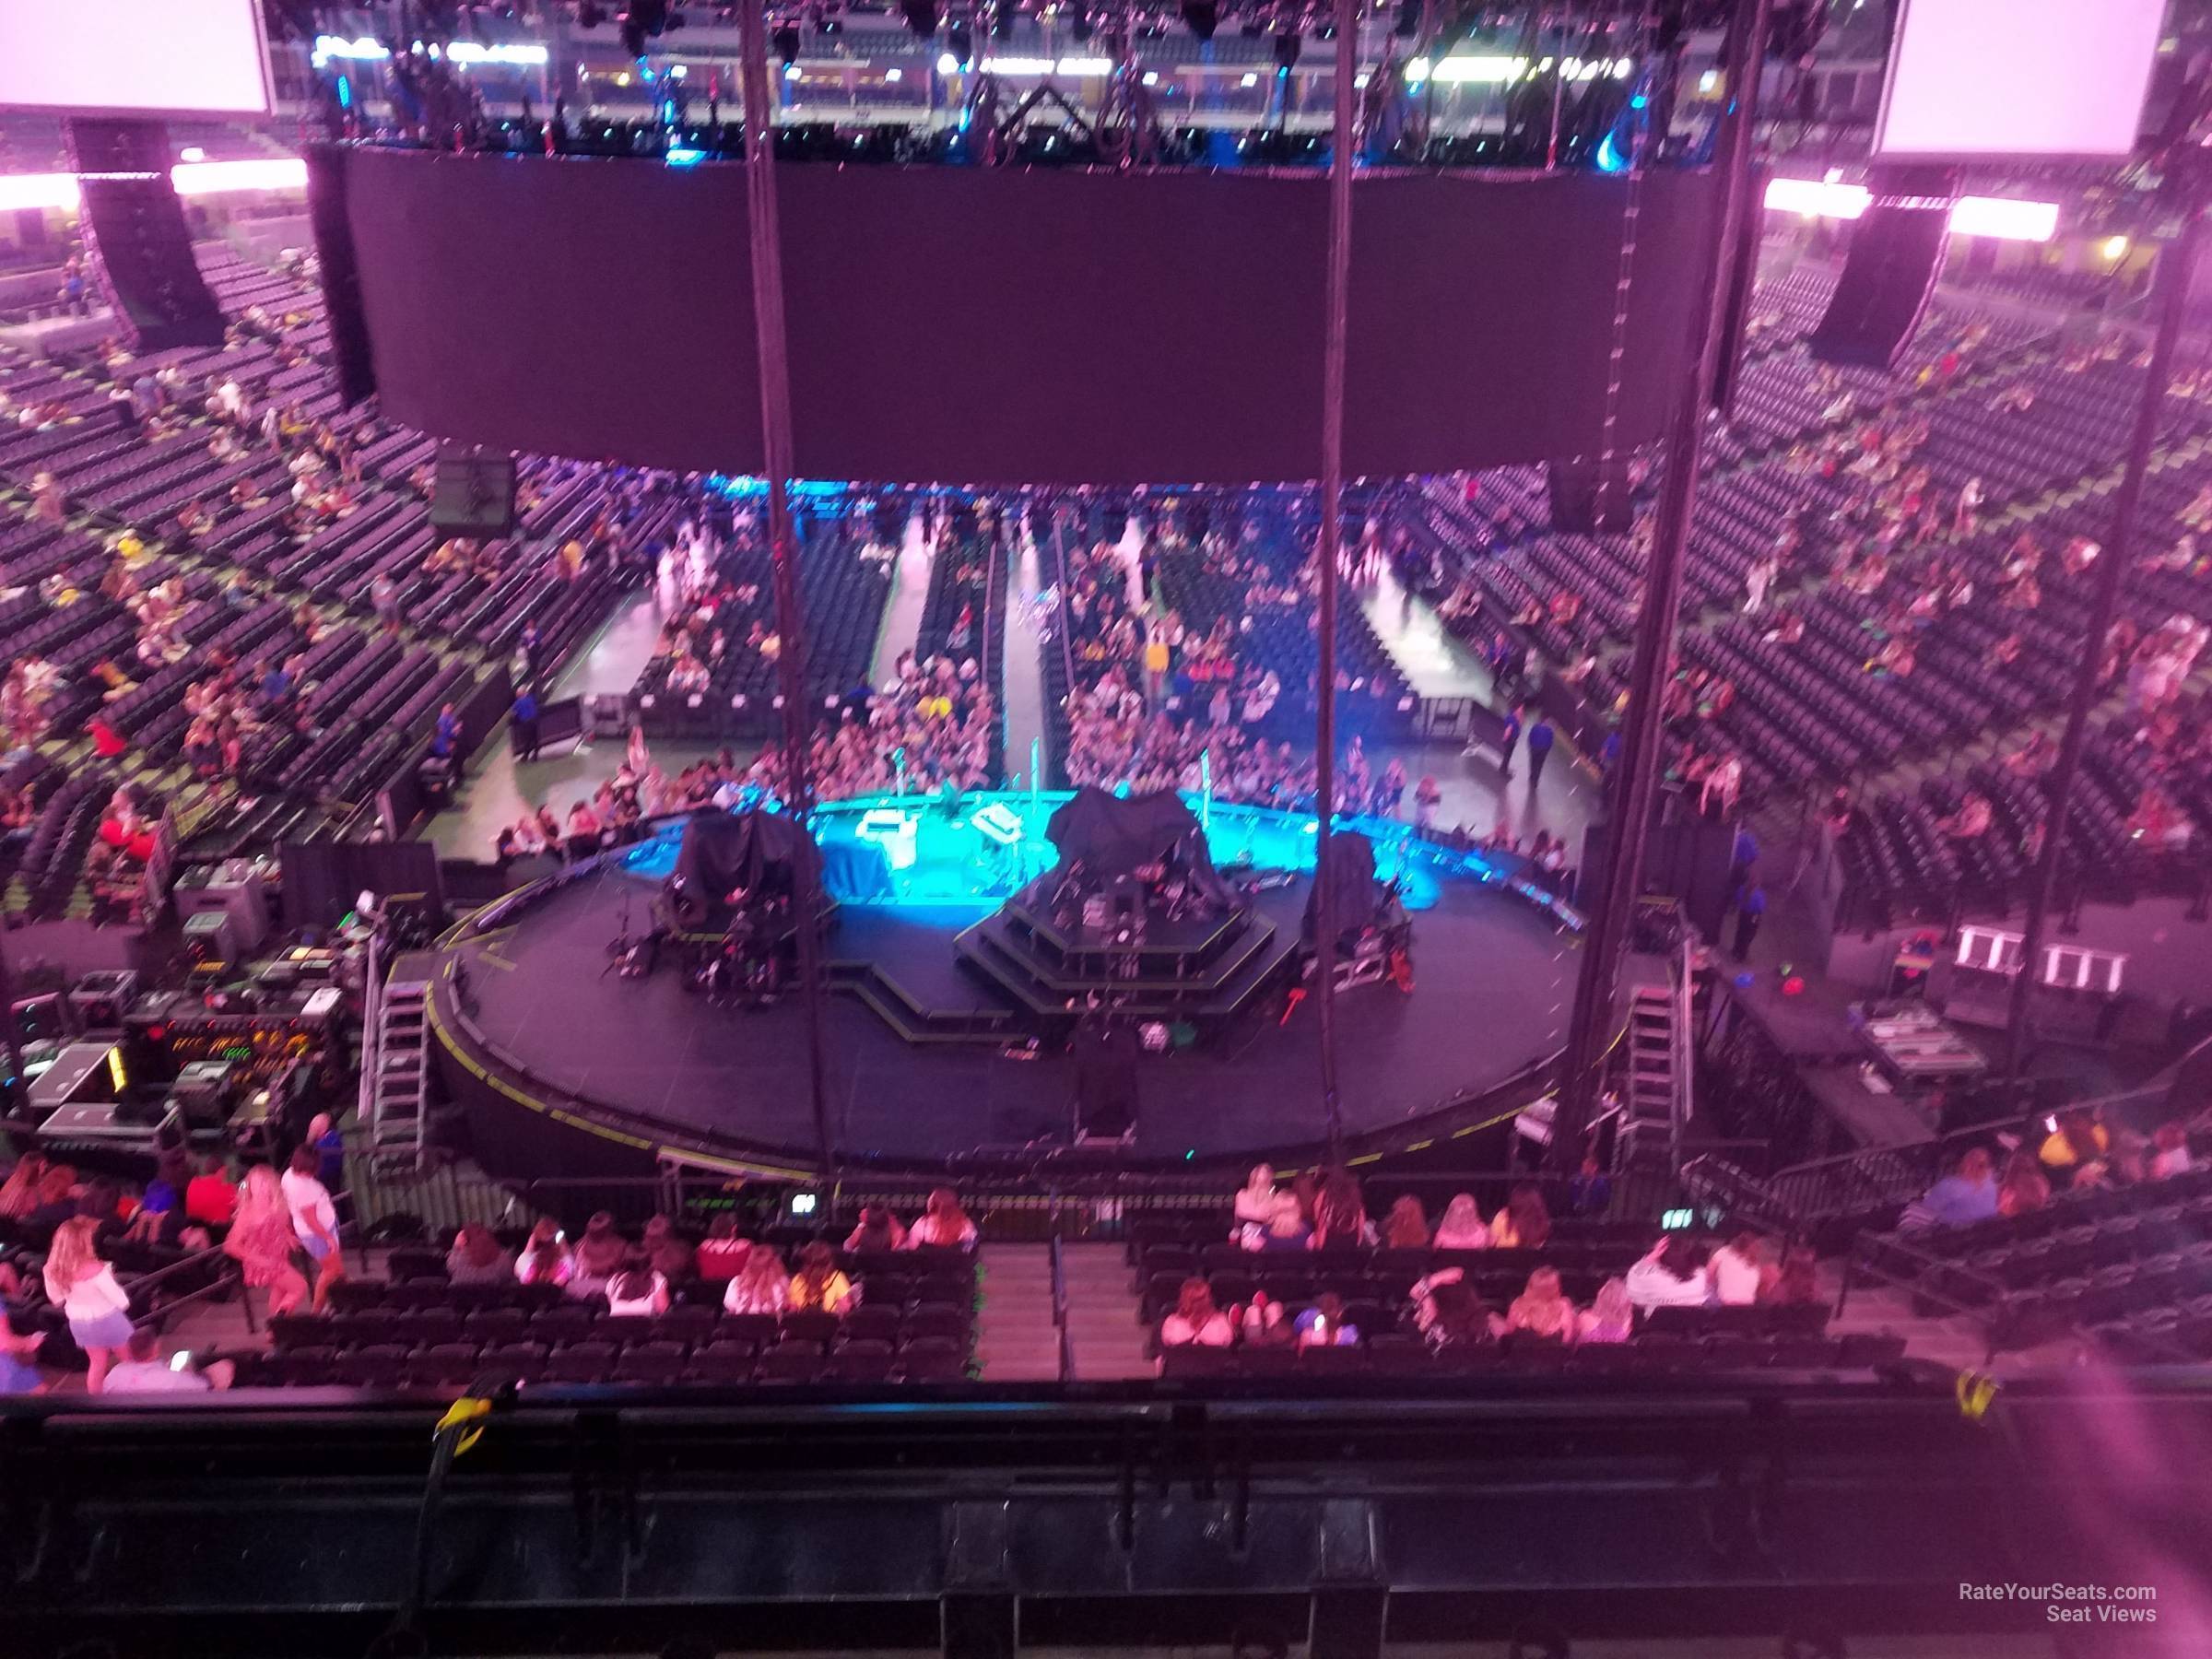 section 246, row 4 seat view  for concert - ball arena